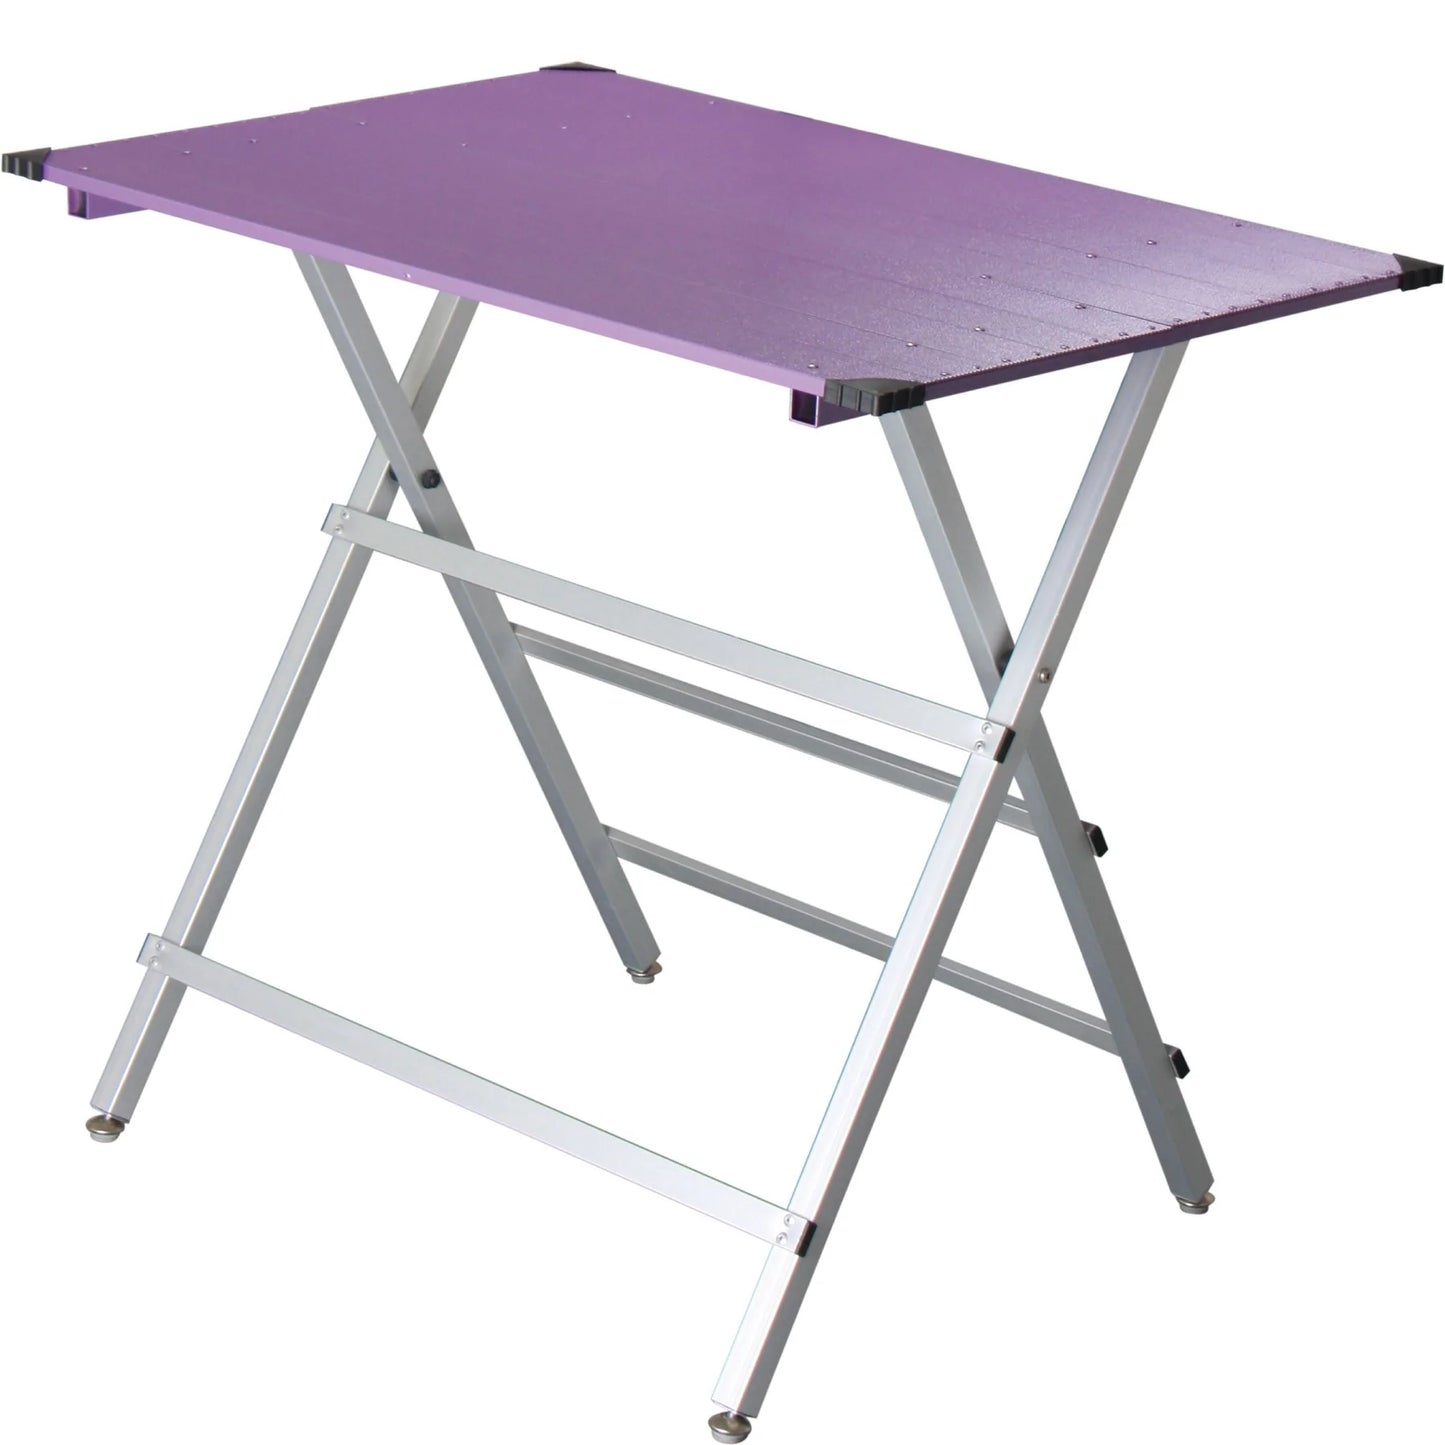 sprint-ultra-light-weight-competition-table-656789_1800x1800